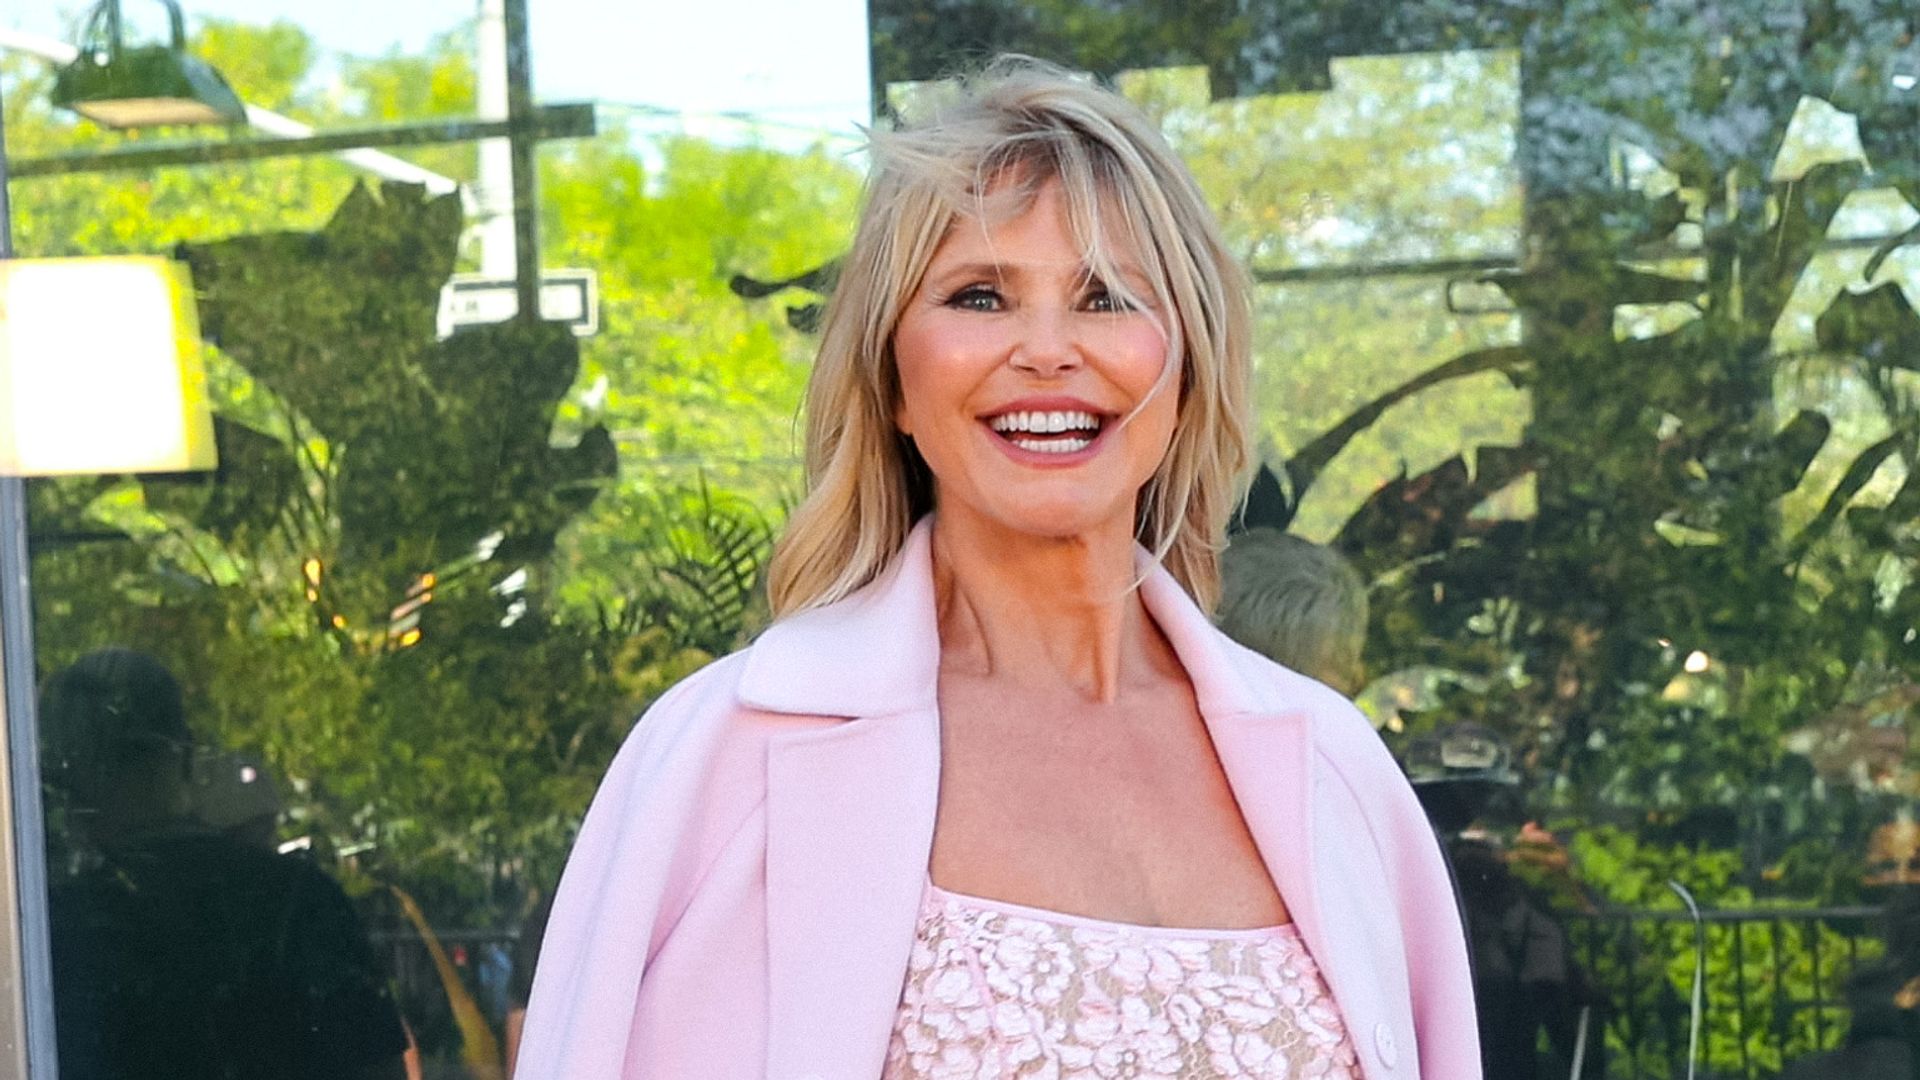 Christie Brinkley is seen arriving at the 'Michael Kors' Fashion Show on September 14, 2022 in New York City